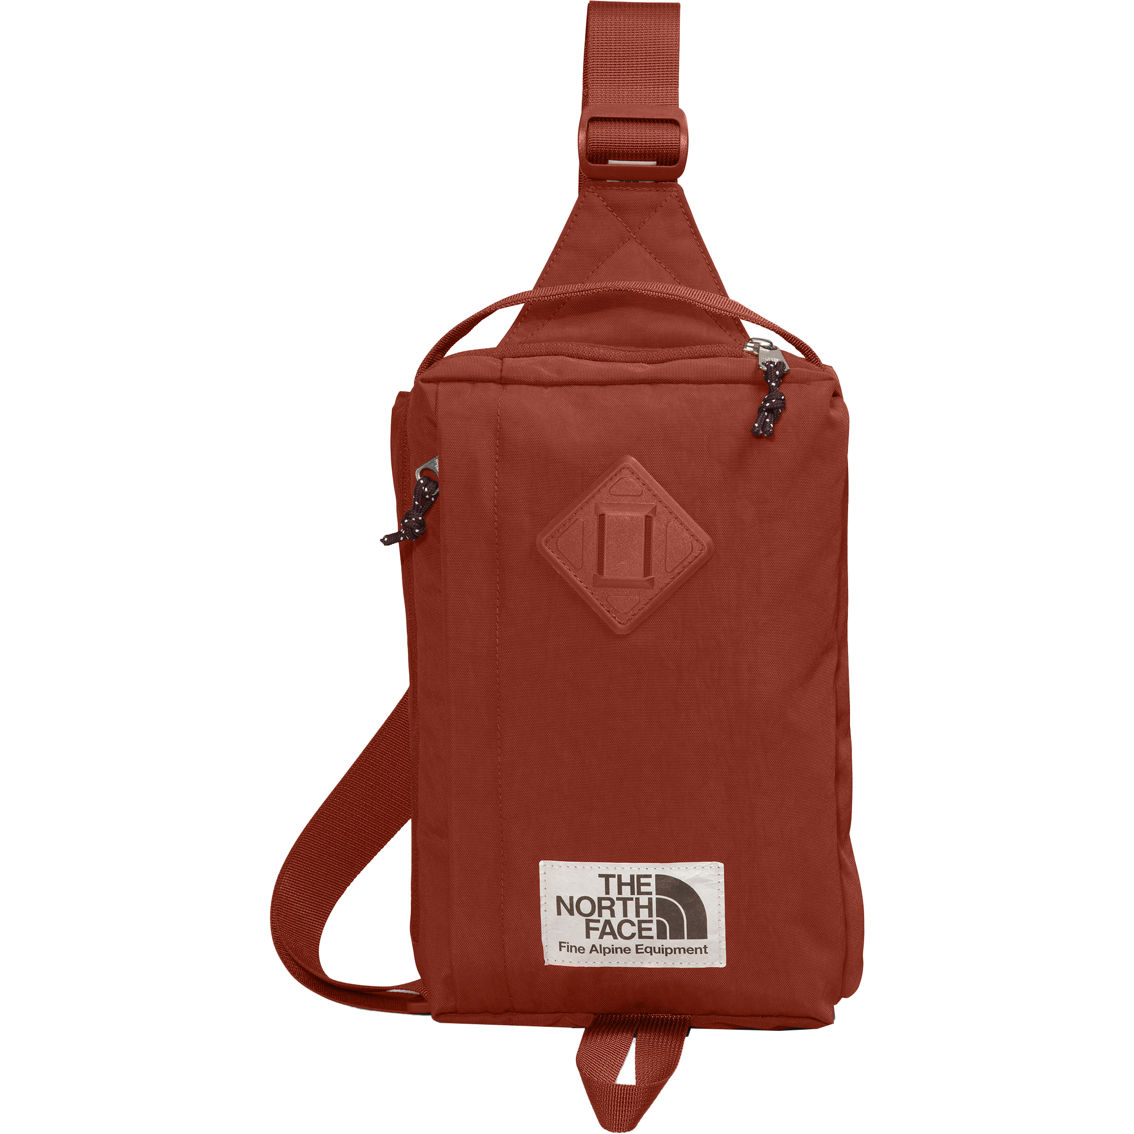 The North Face Berkeley Field Bag | Luggage | Clothing & Accessories ...